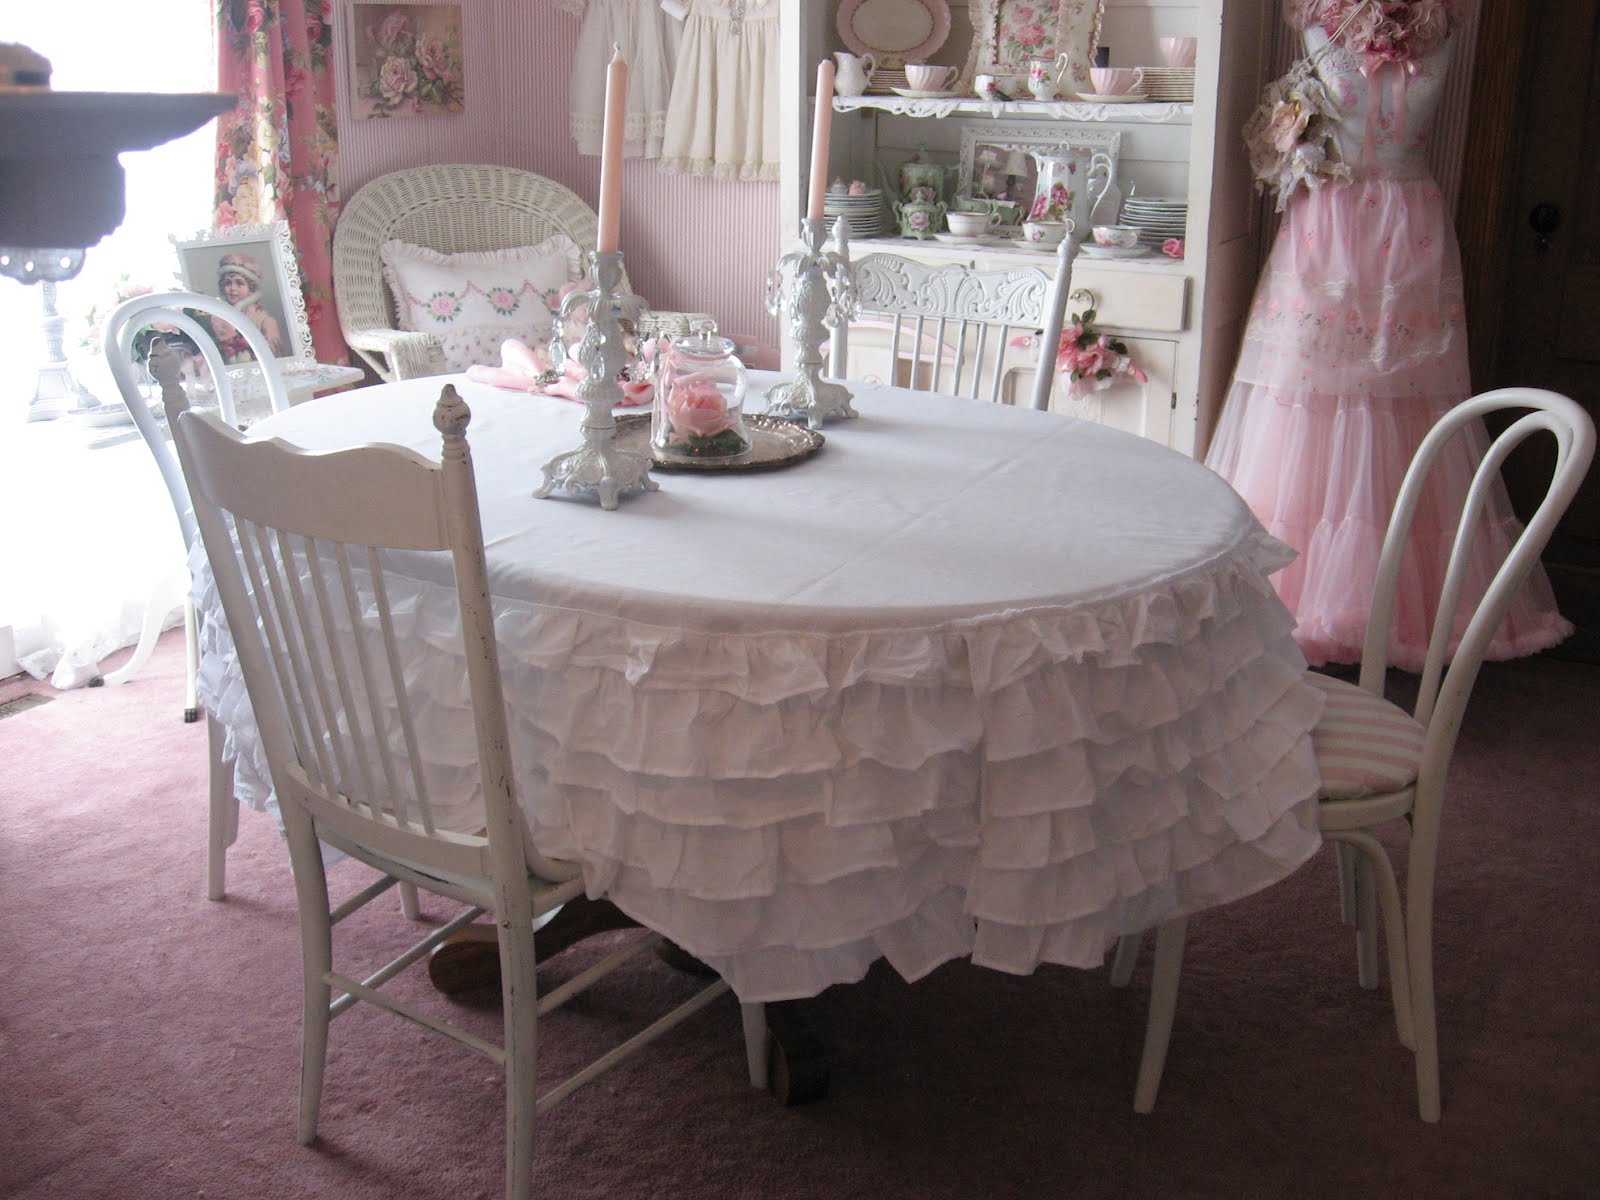 Shabby Cats And Roses Ruffled Bedskirt Turned Tablecloth